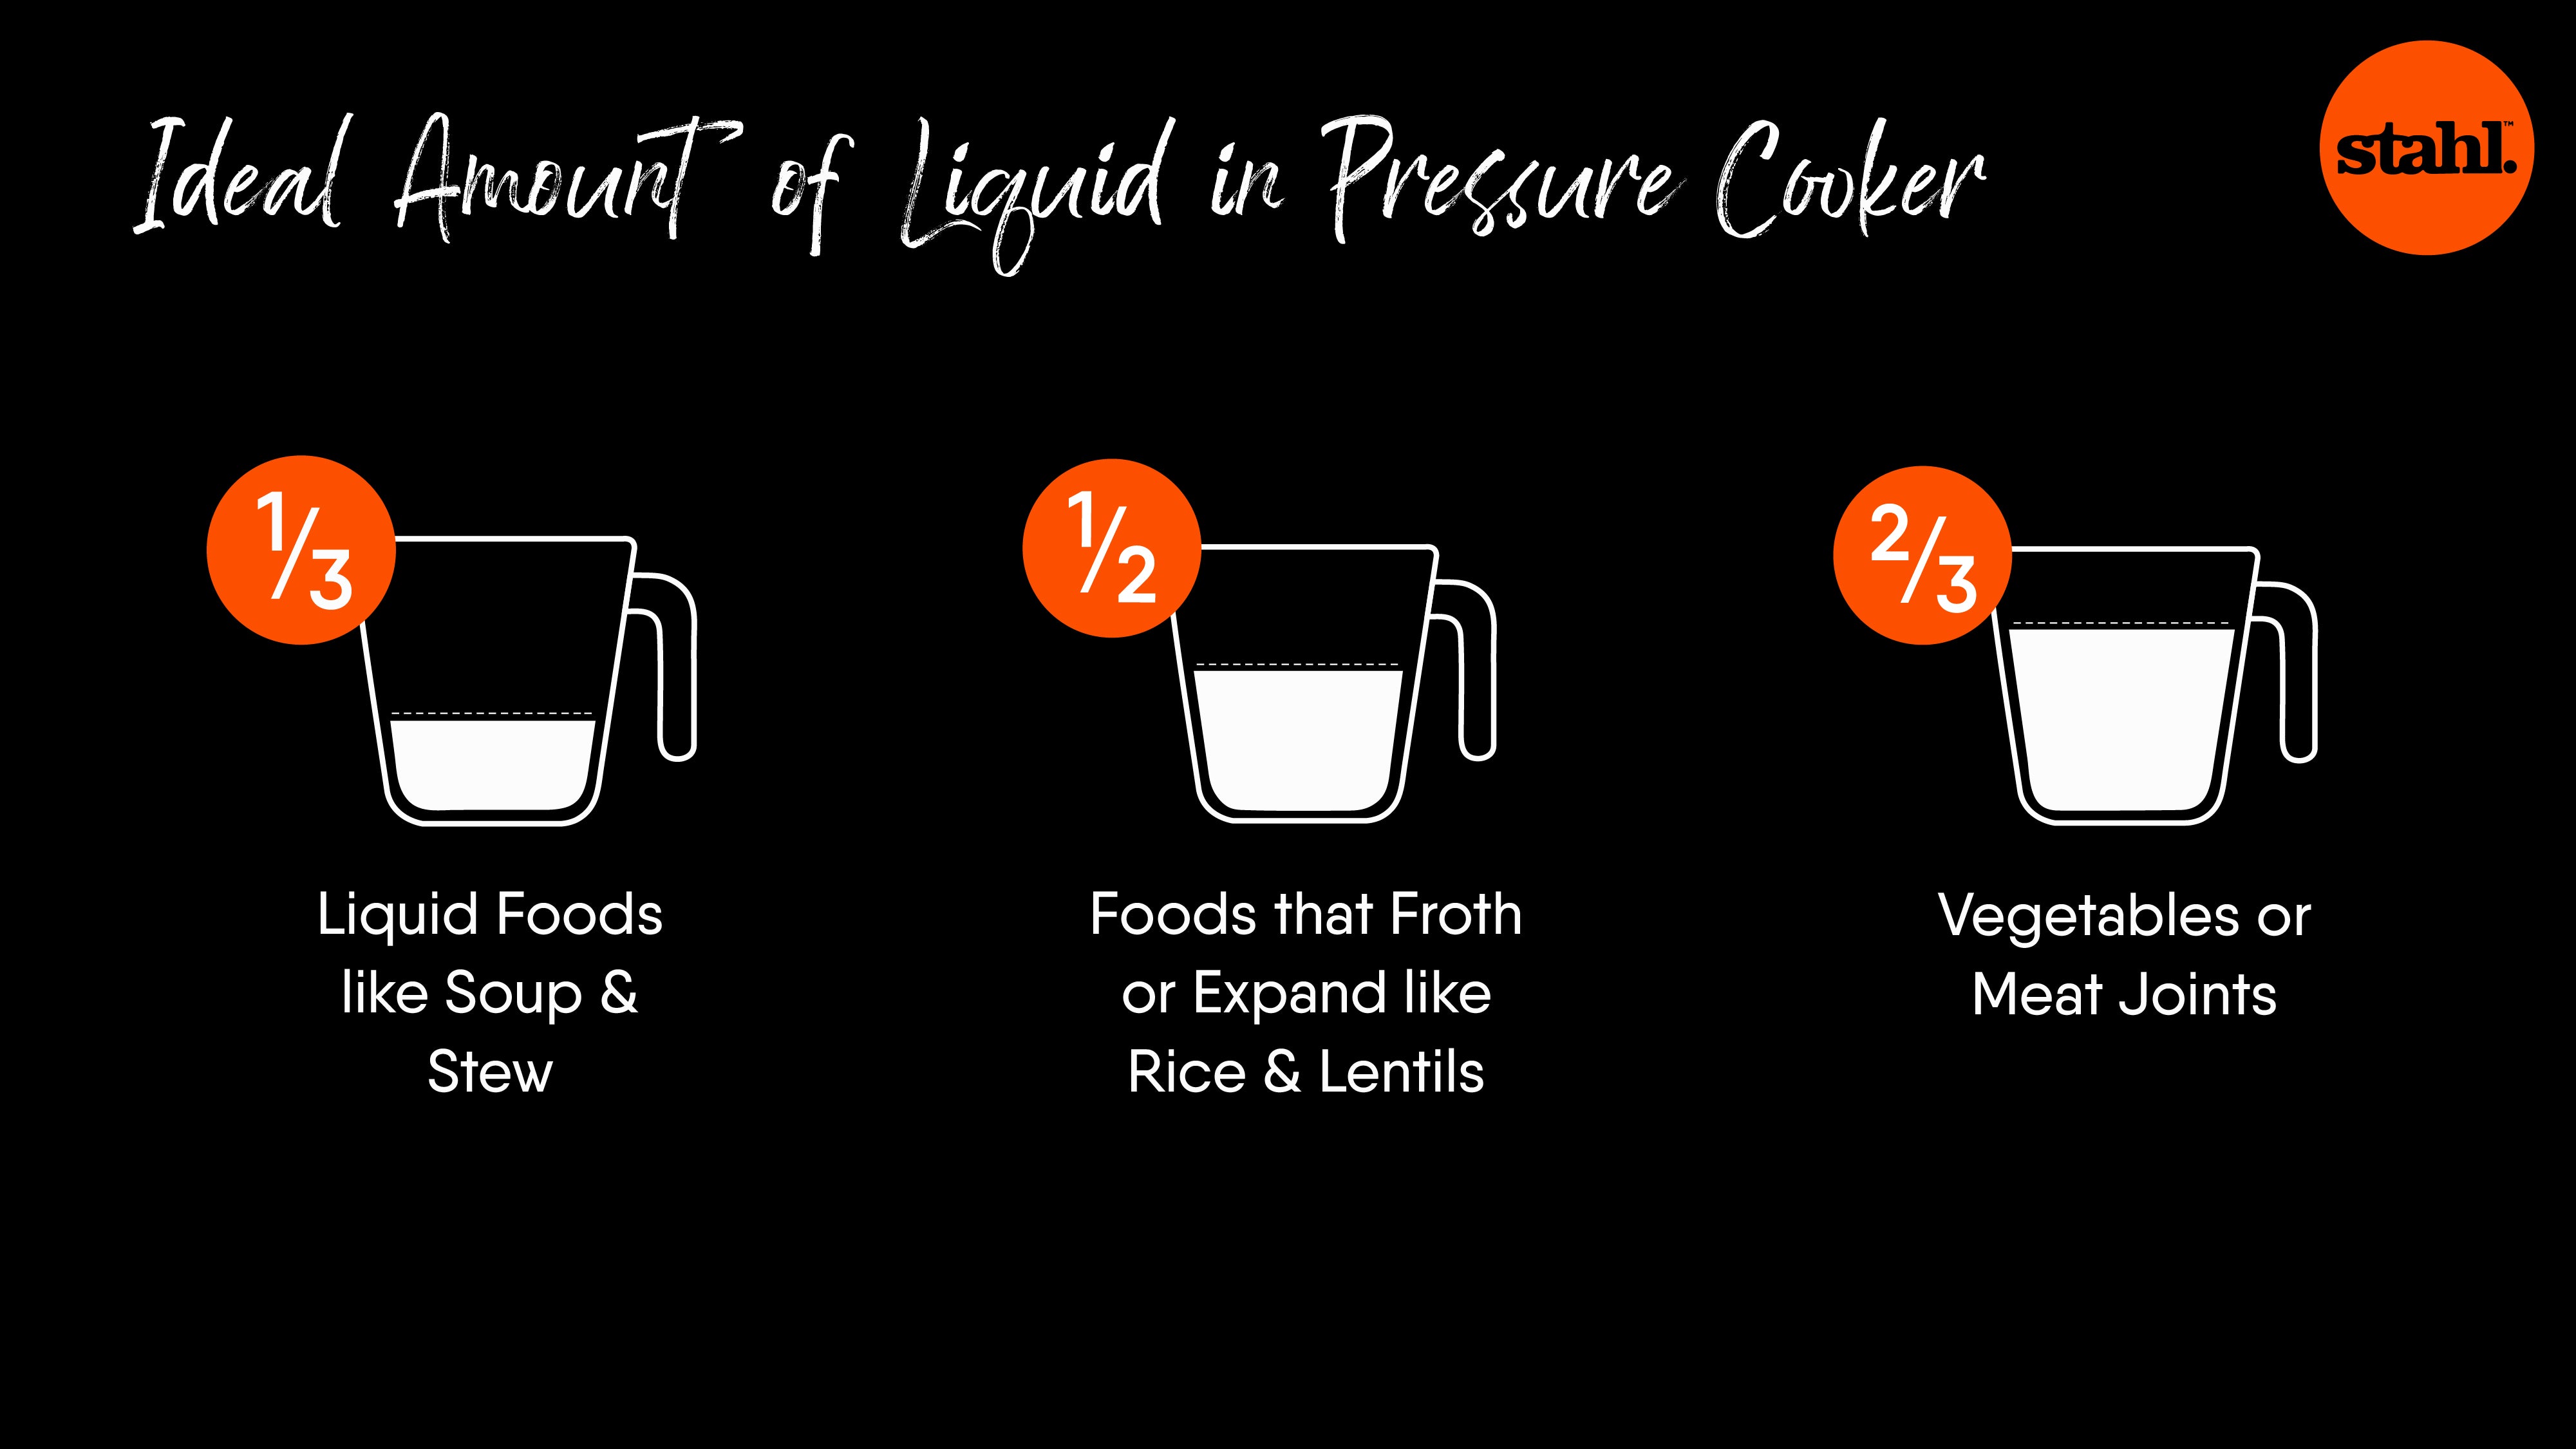 Ideal amount of liquid in a pressure cooker